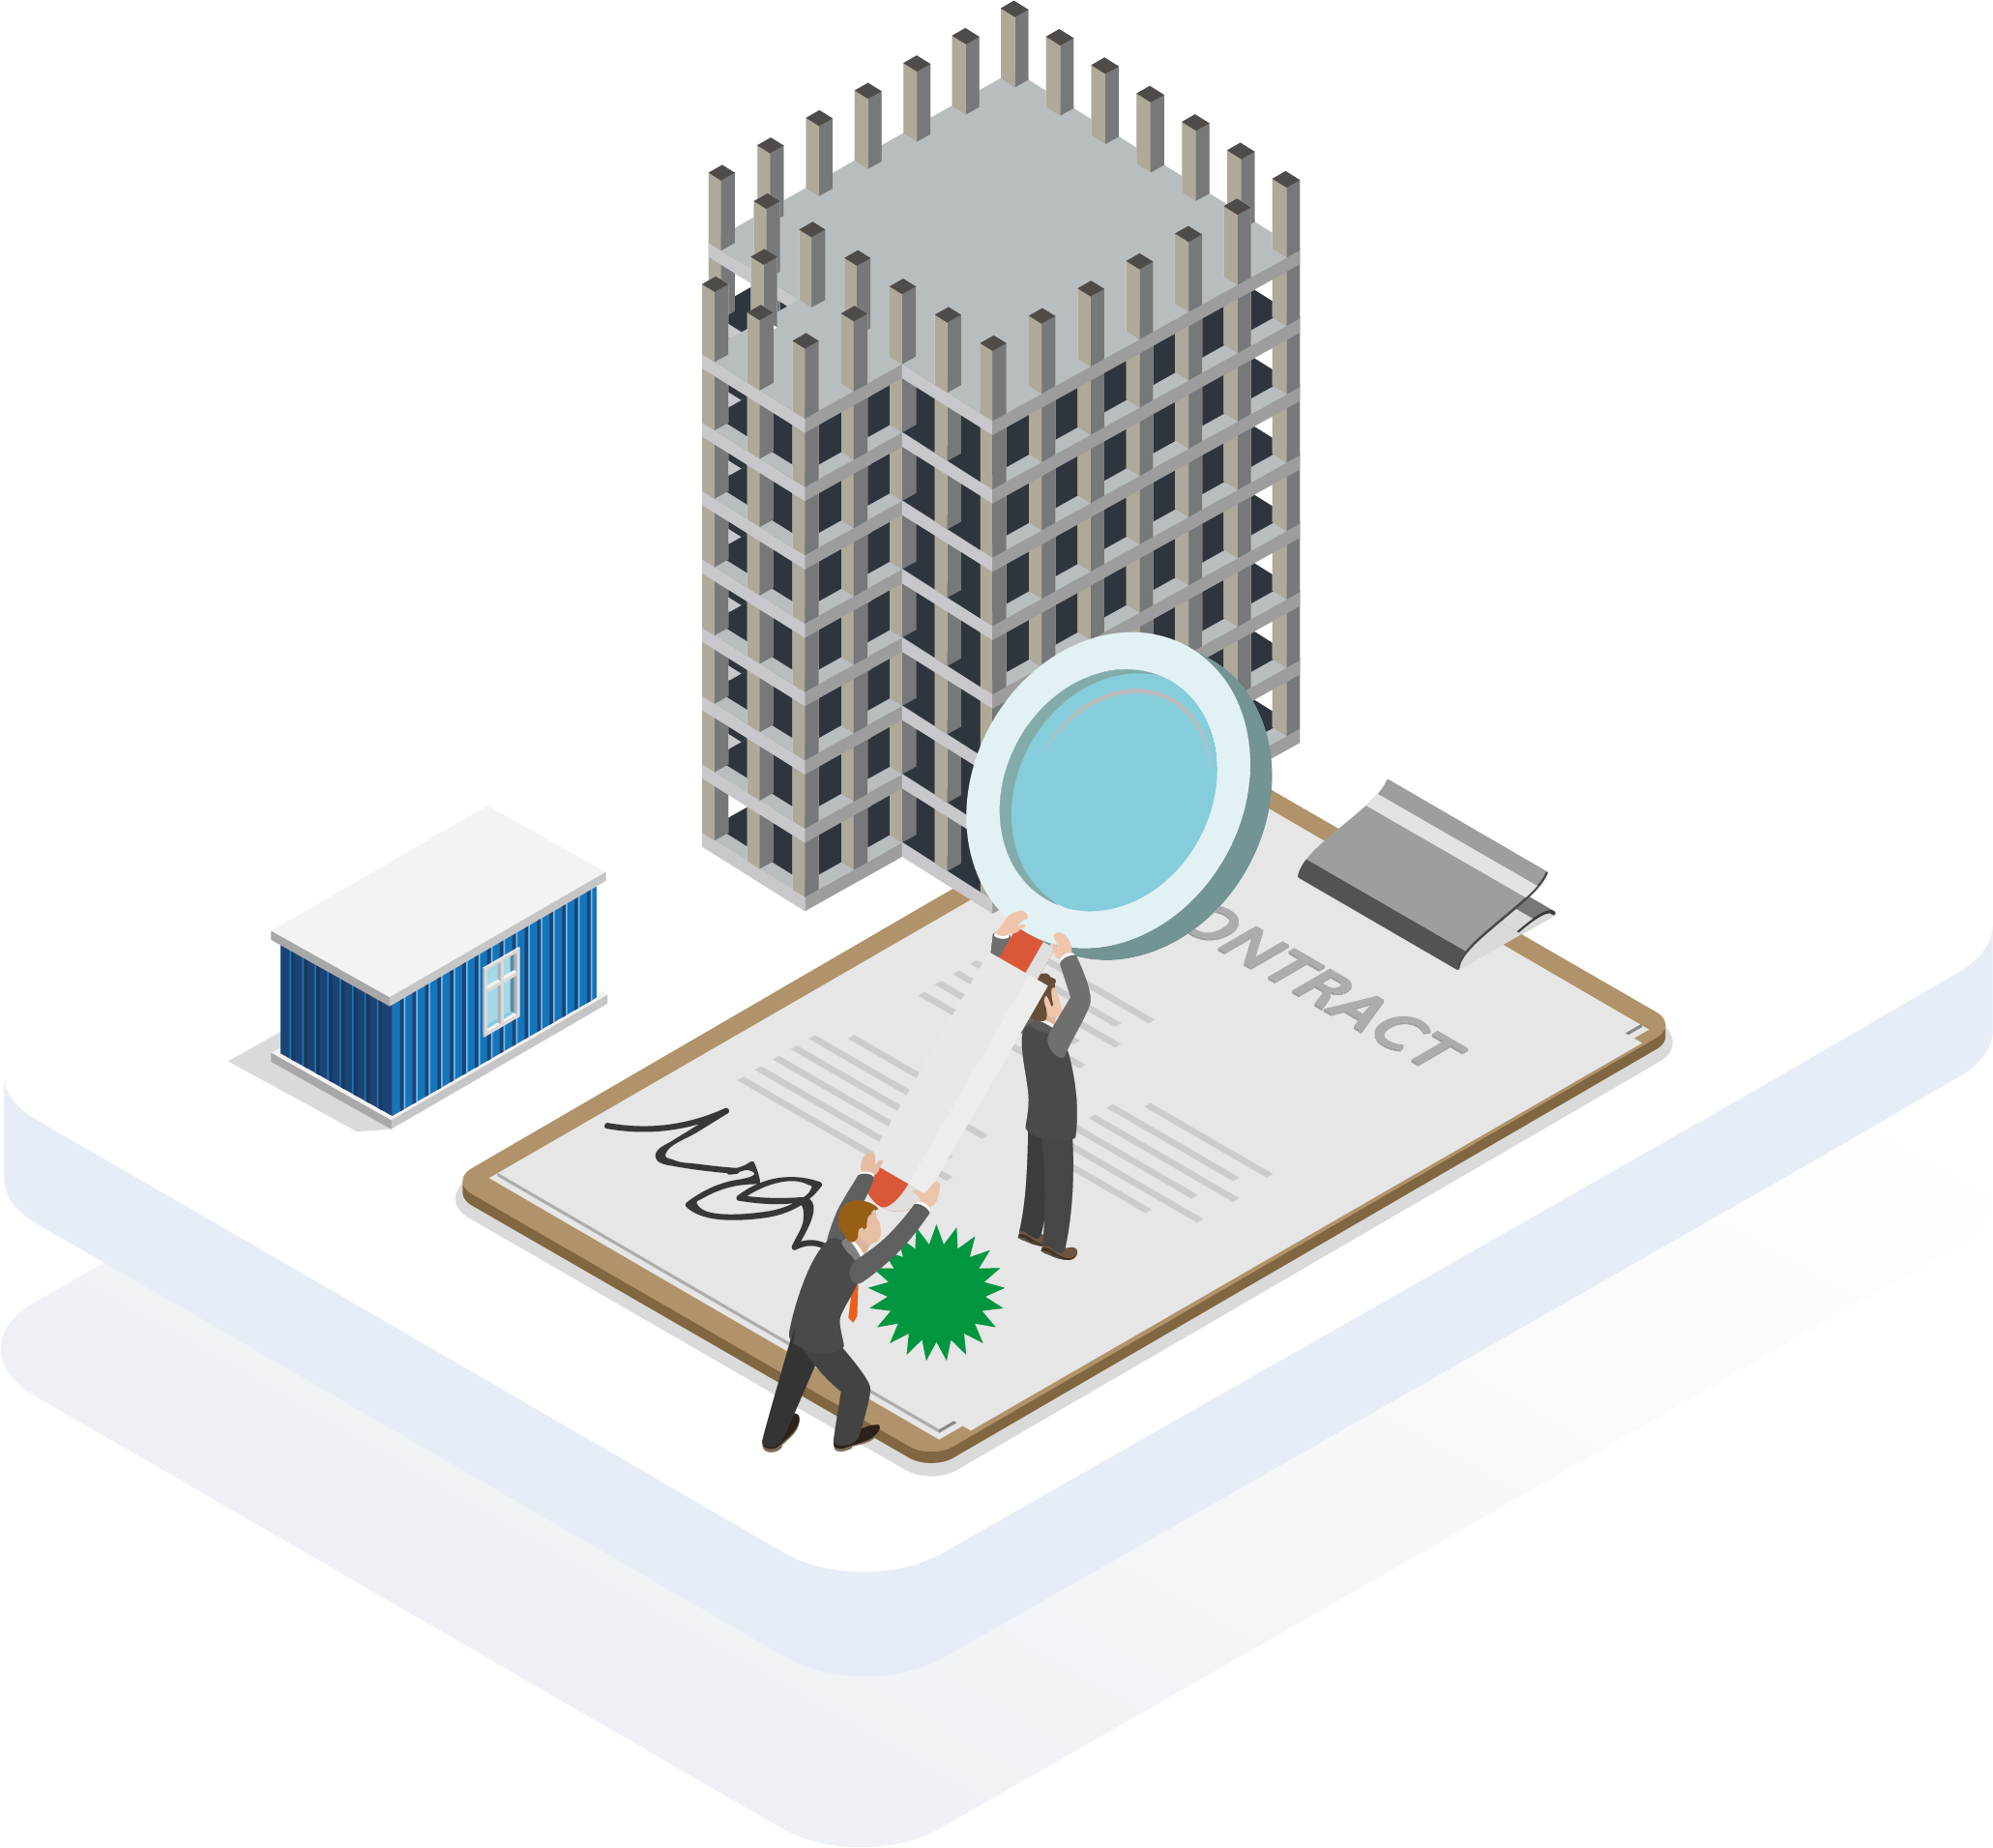 3D animated image of contract administration.